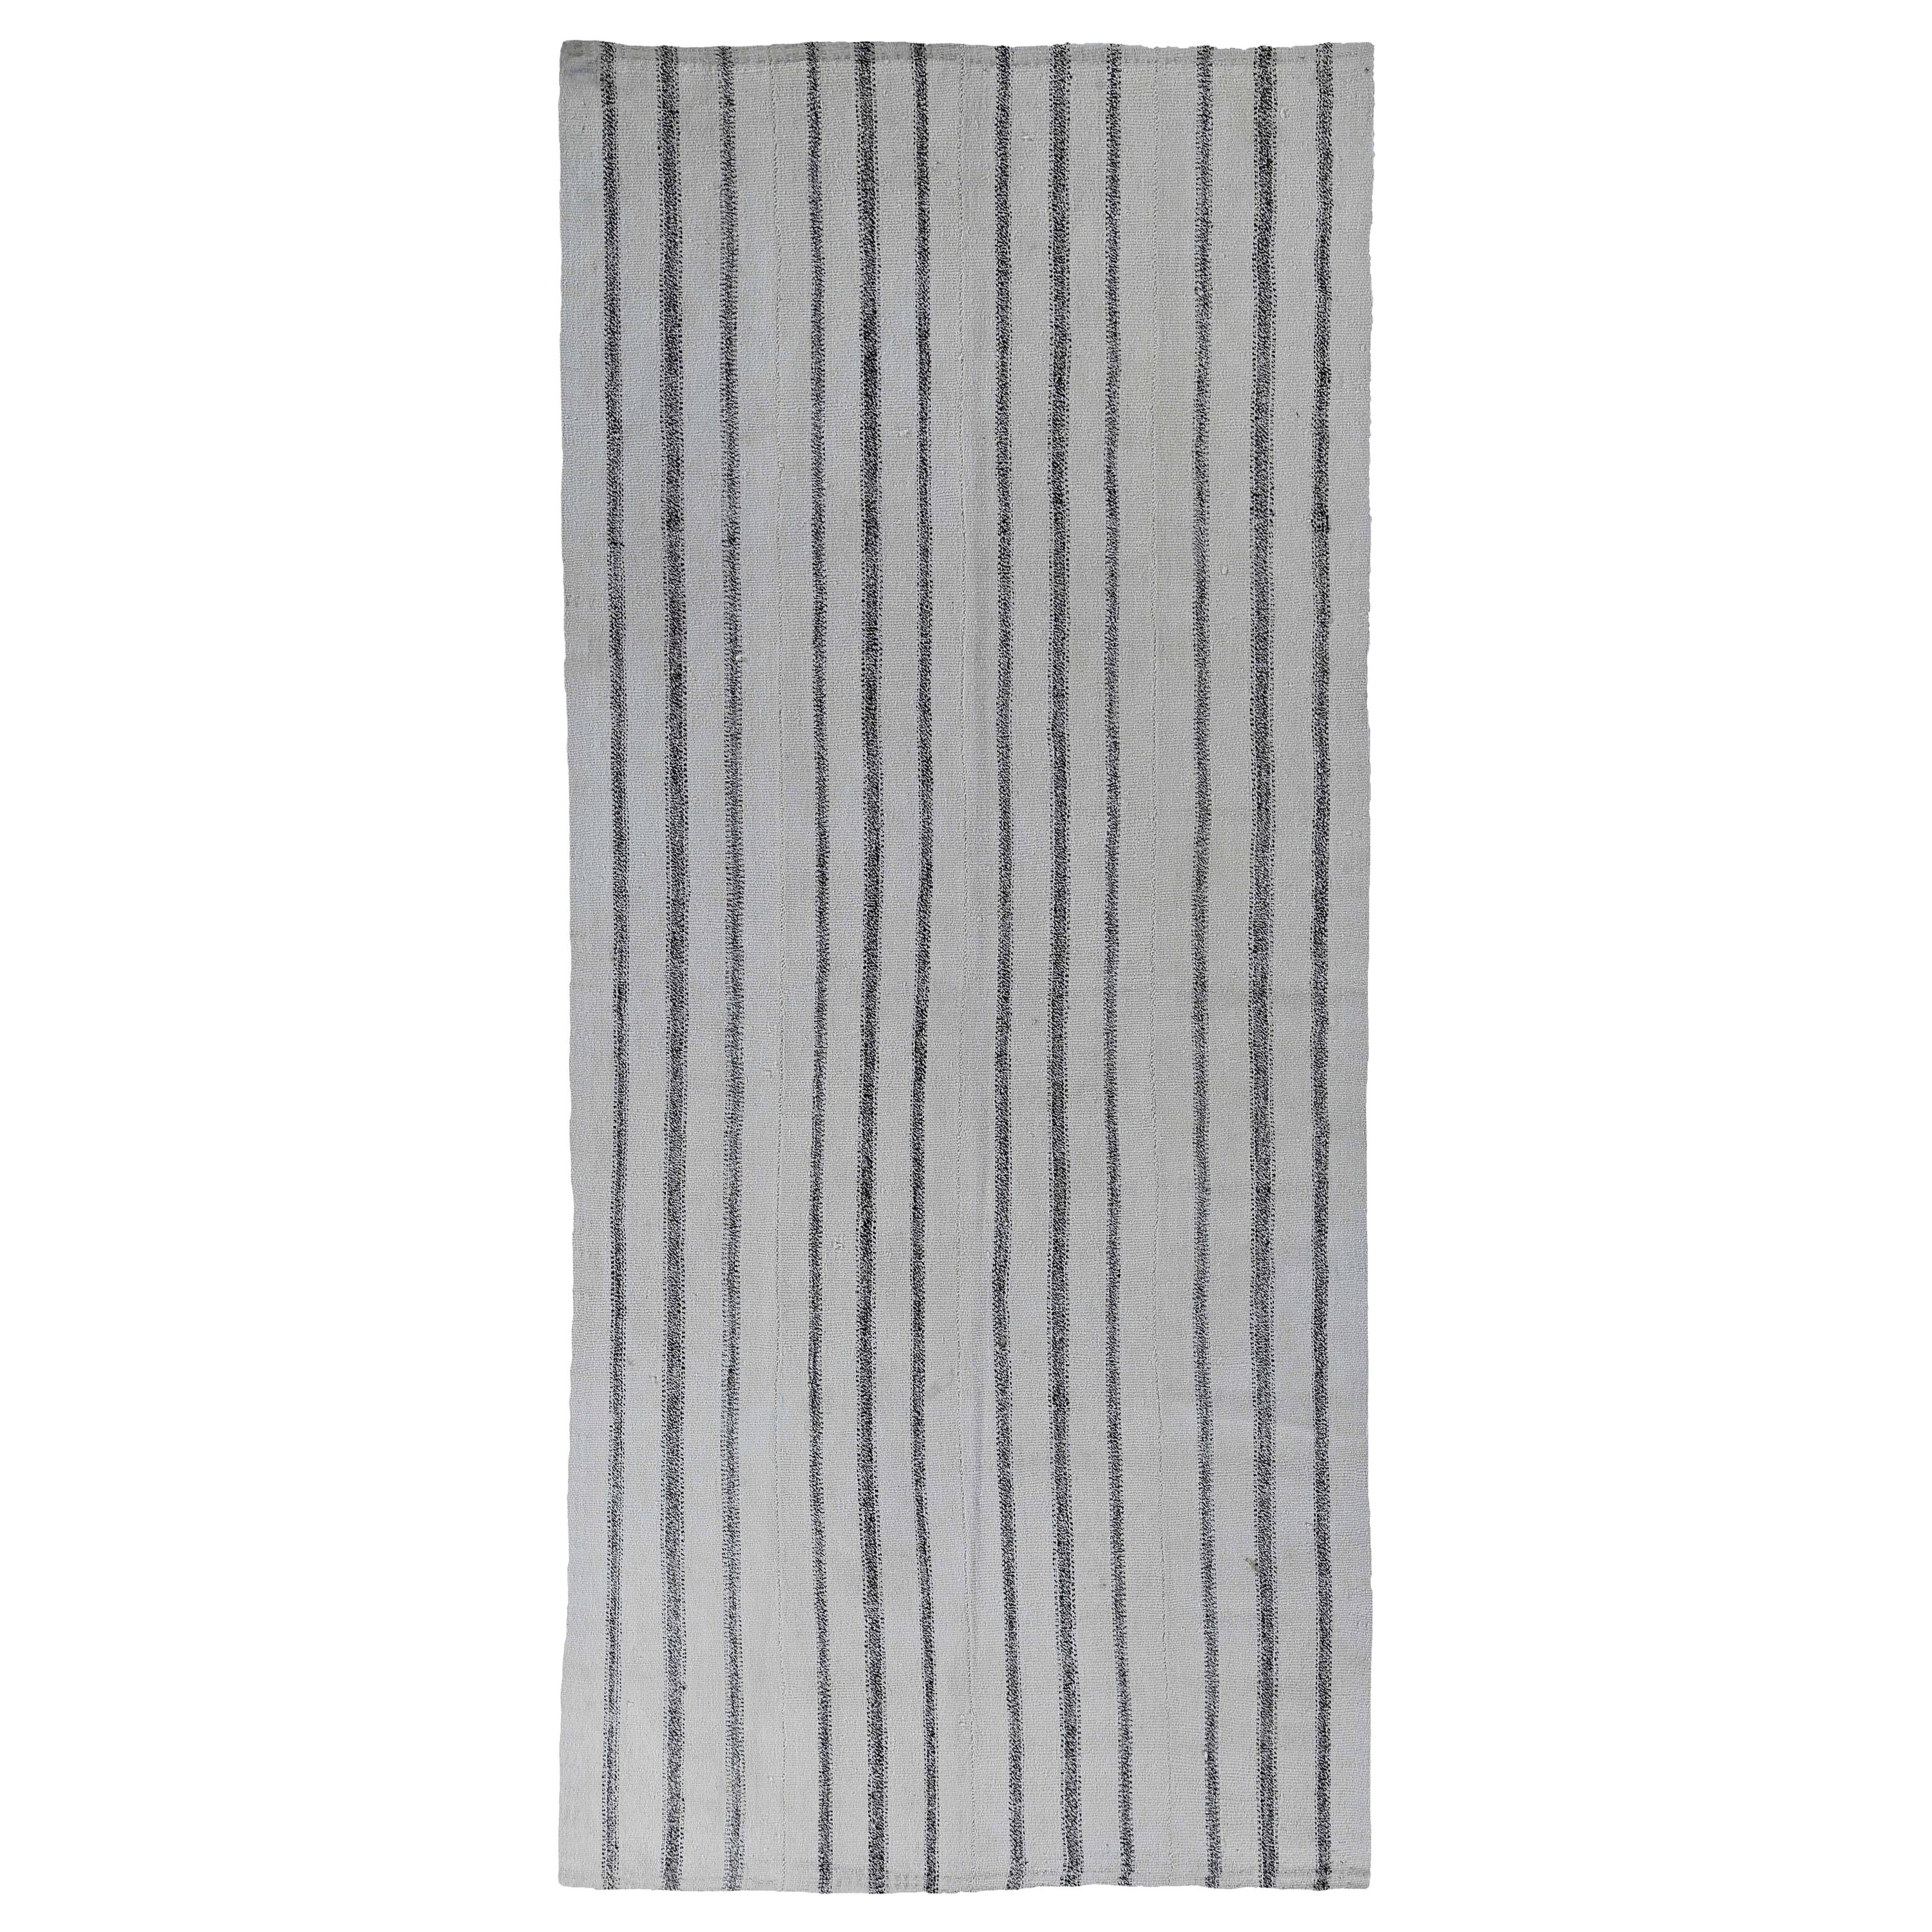 Modern Turkish Kilim Runner Rug with Black Pencil Stripes on White Field For Sale